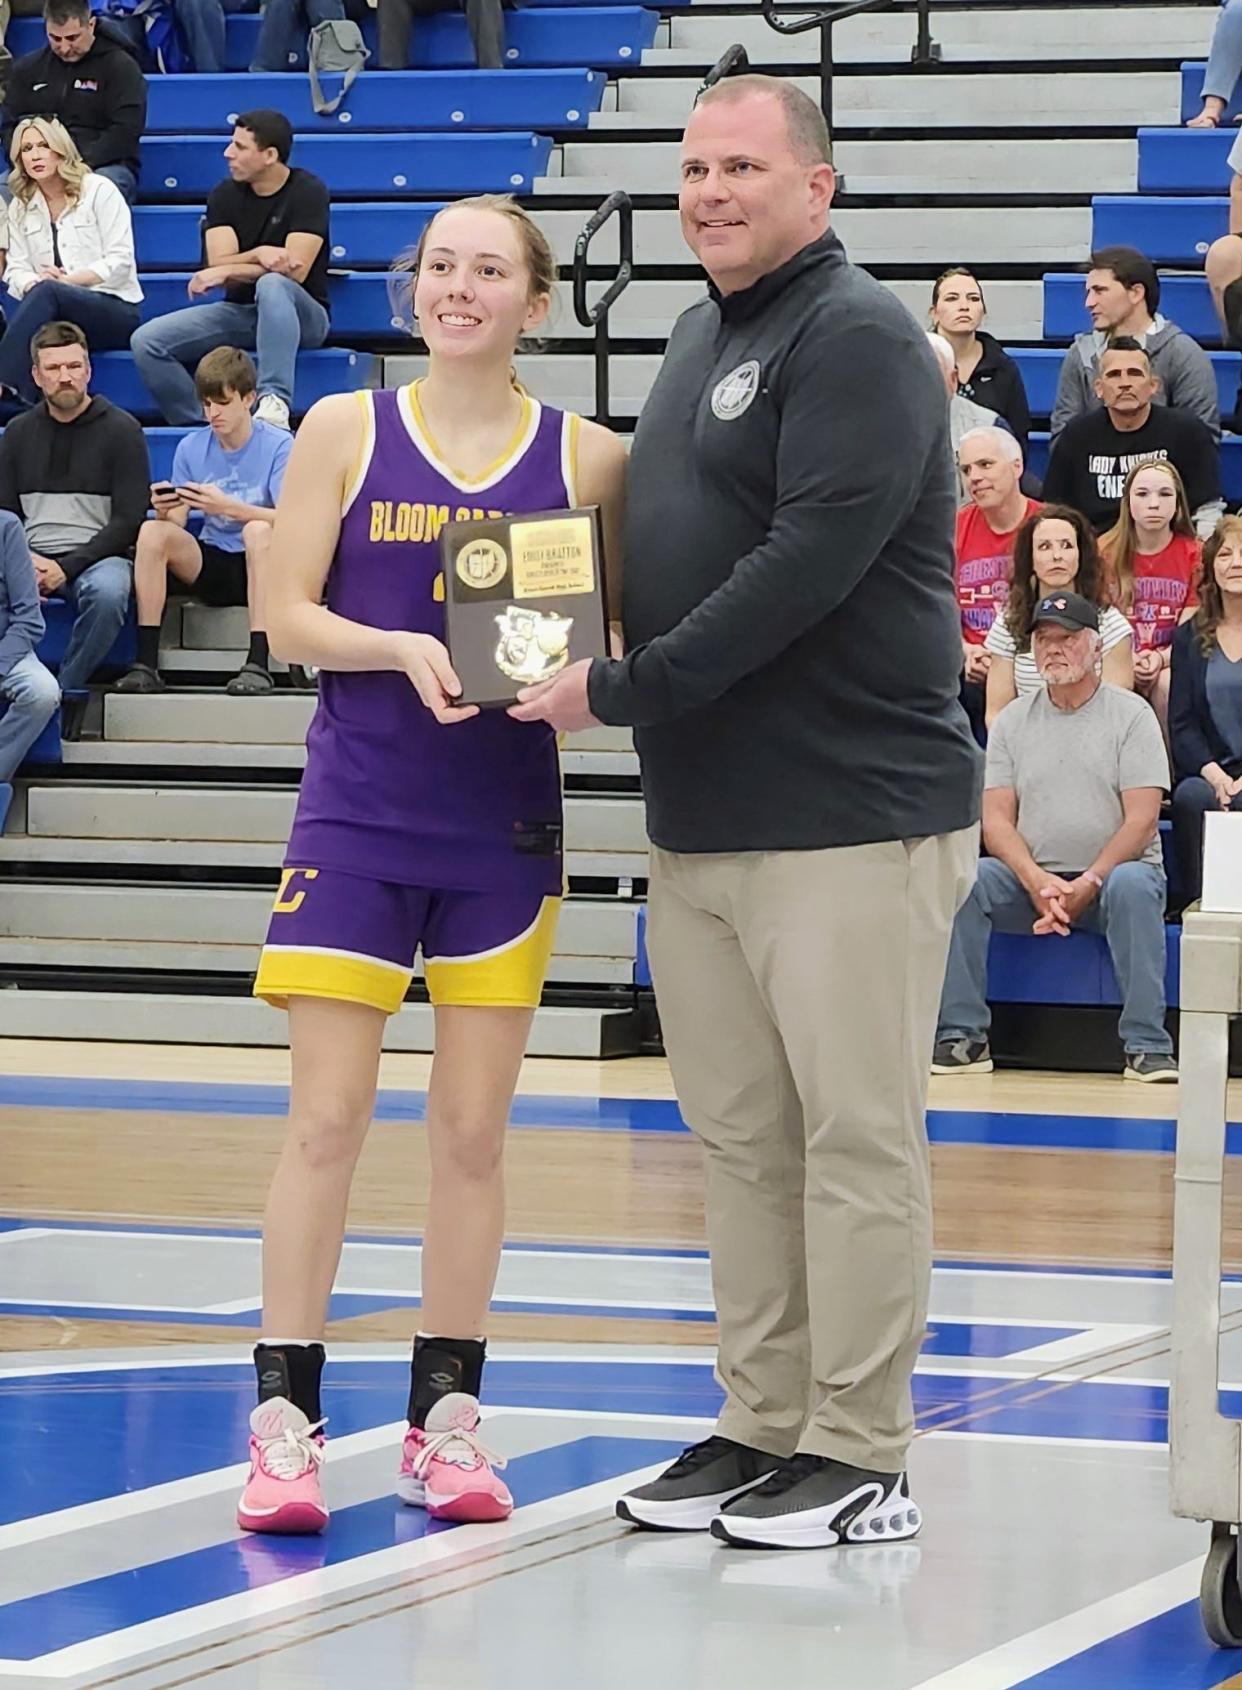 Bloom-Carroll's Emily Bratton is honored as Division II state Player of the Year during halftime of the Ohio High School Basketball Coaches Association North-South game Friday night at Olentangy Liberty. Presenting the award is John Bronczek of HUDL. Bratton, a Miami University signee, led the Bulldogs to a Division II district championship this season.